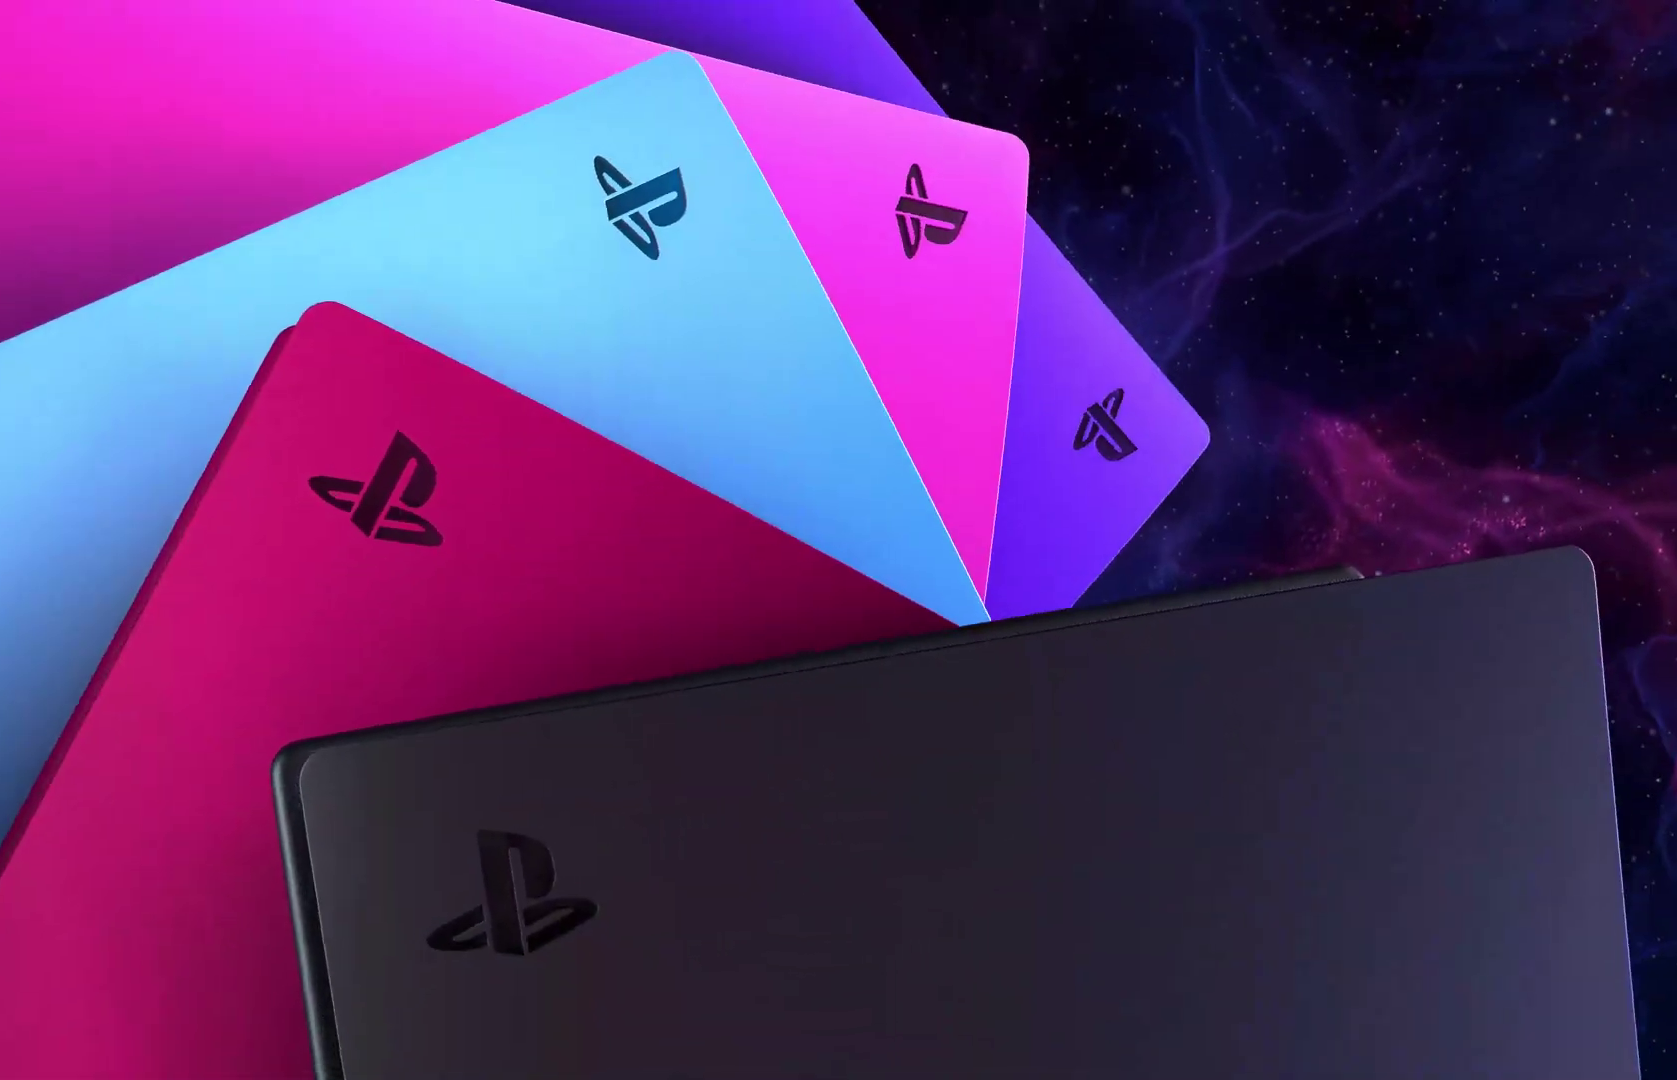 Sony Revealed the New PS5 Cover